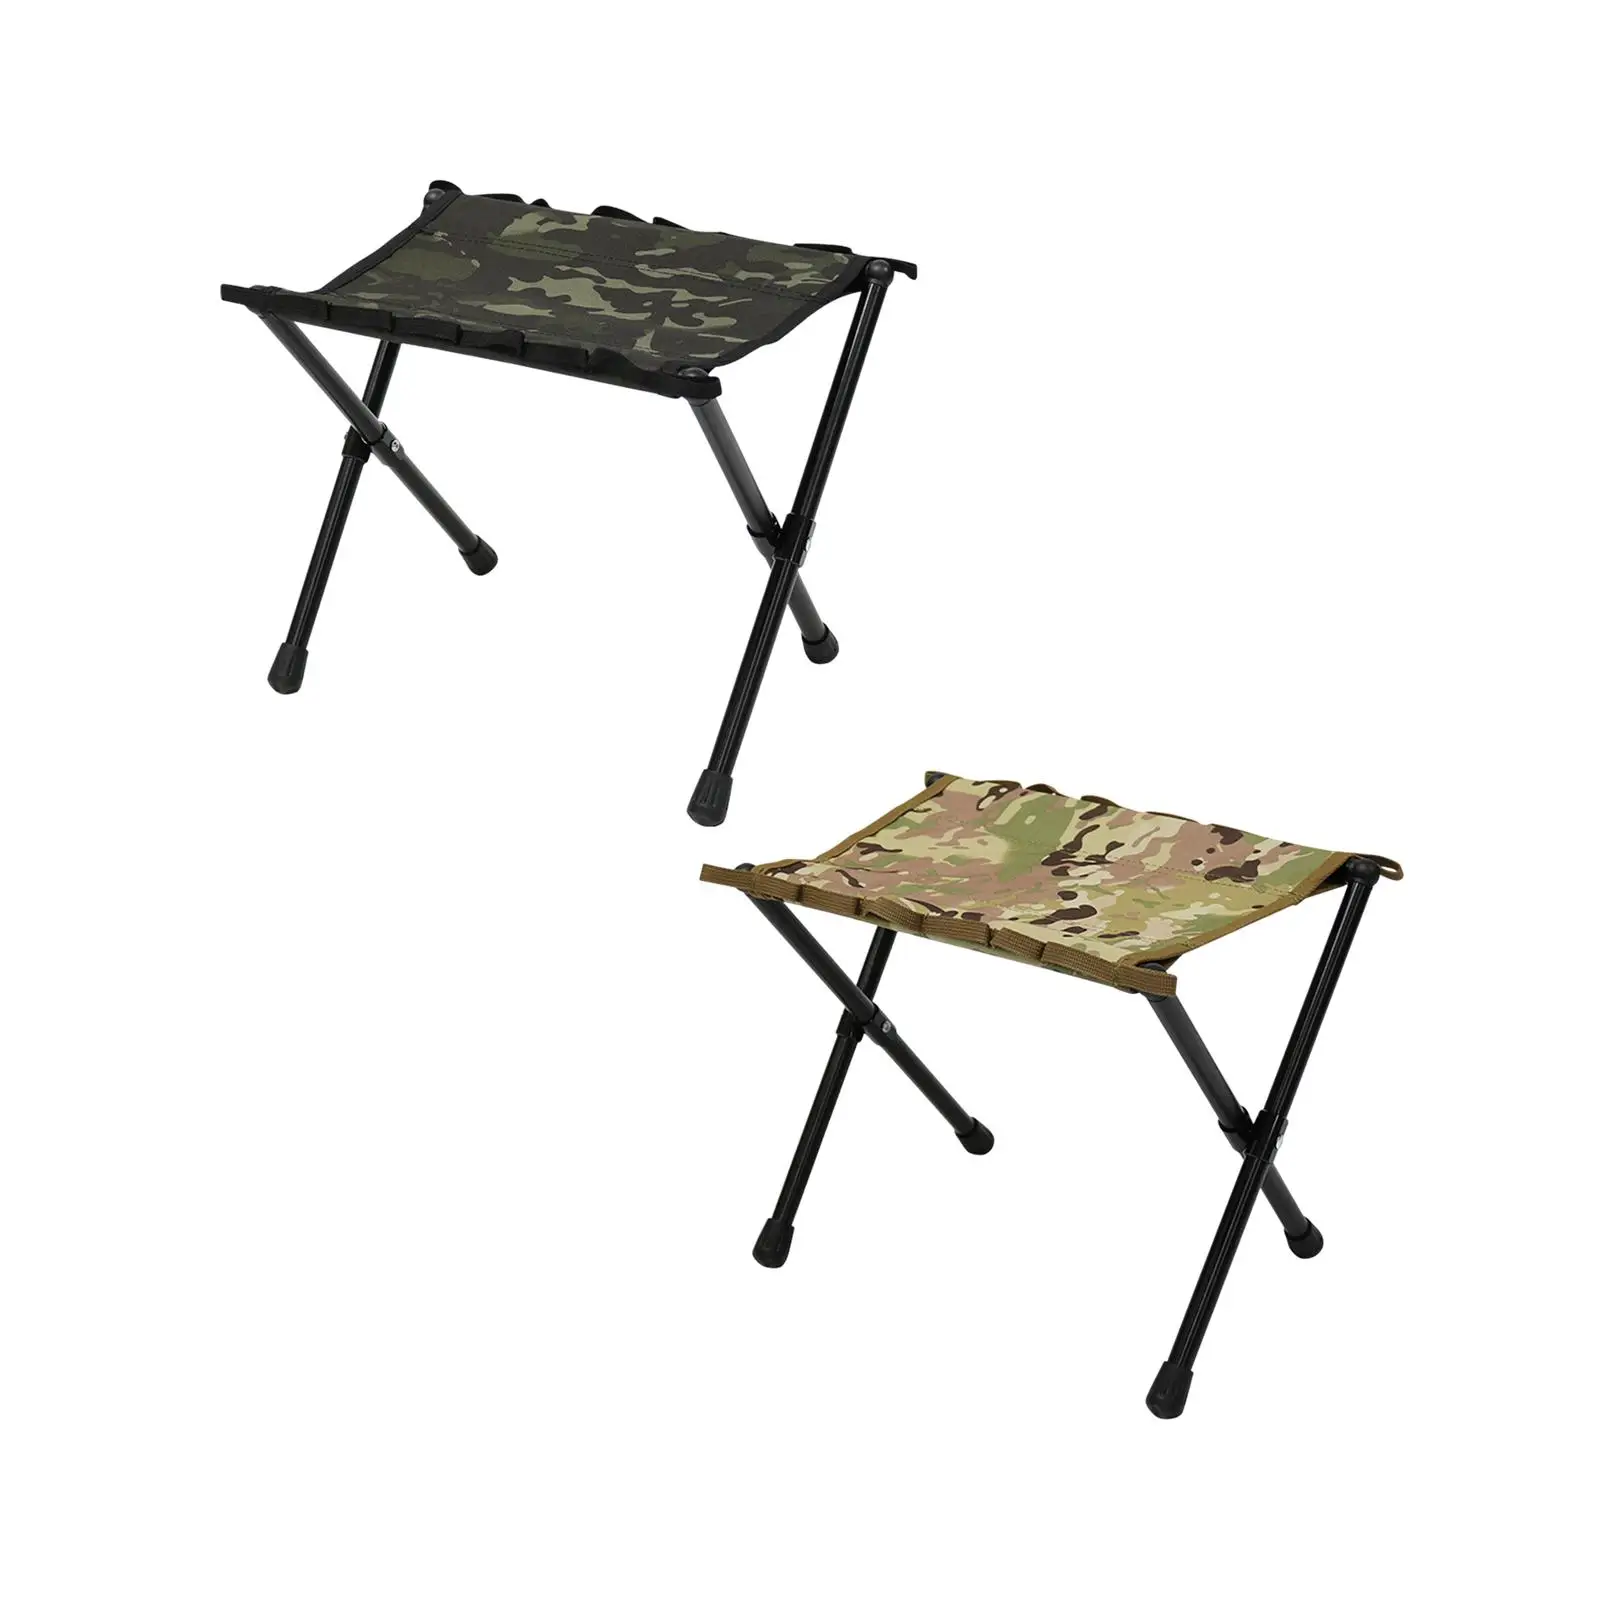 Camping Stools Folding Camp Stool Lightweight Foldable Footstool Fishing Chairs for Festival Gardening Lawn Concert Hunting